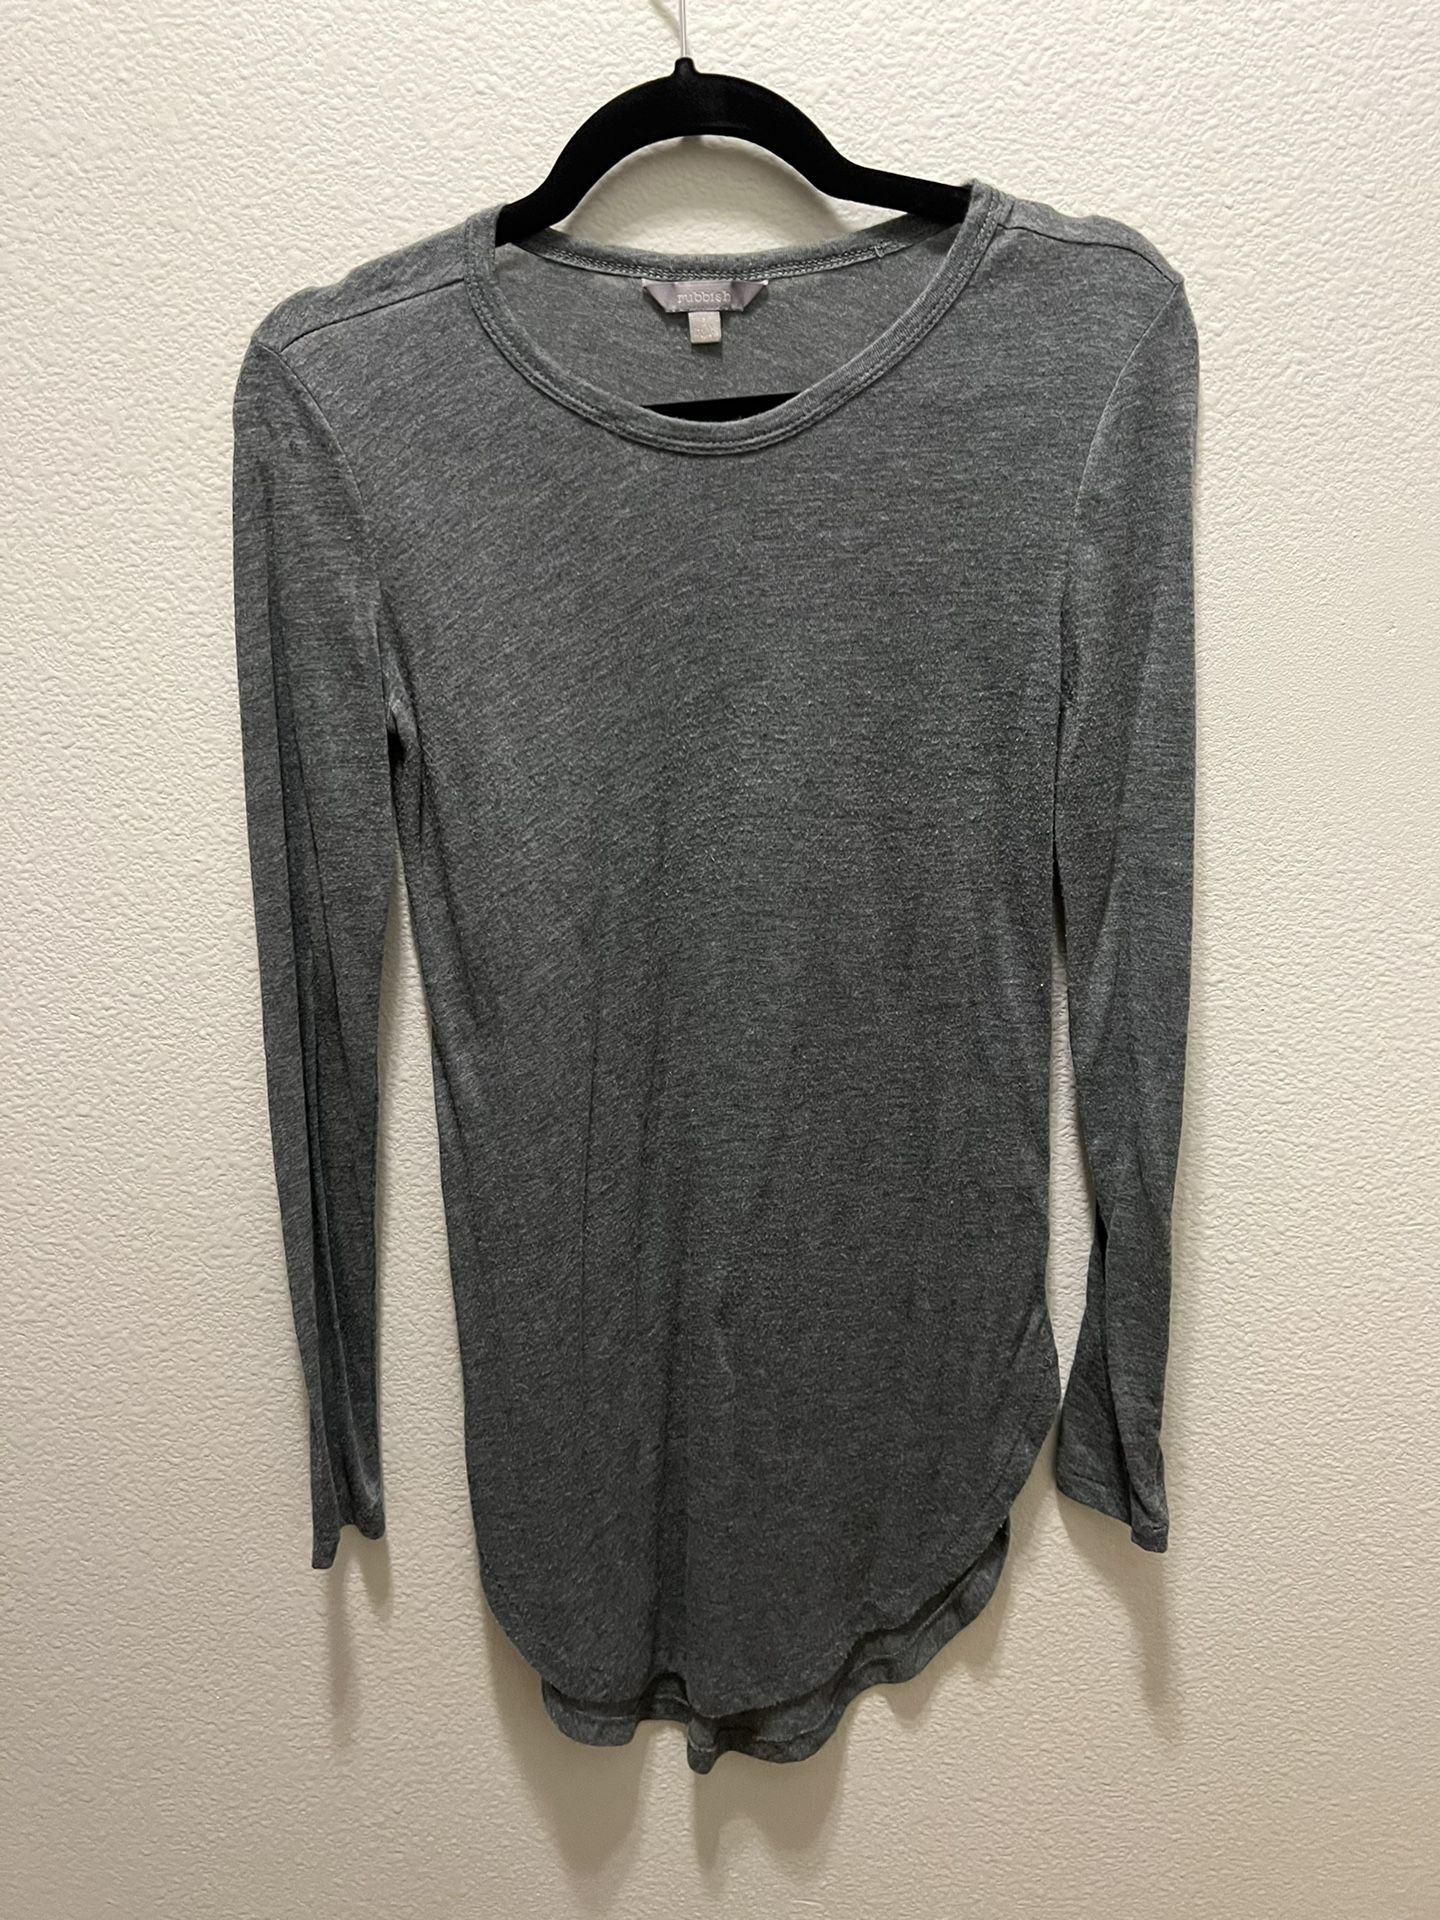 Tunic Top - Size Small